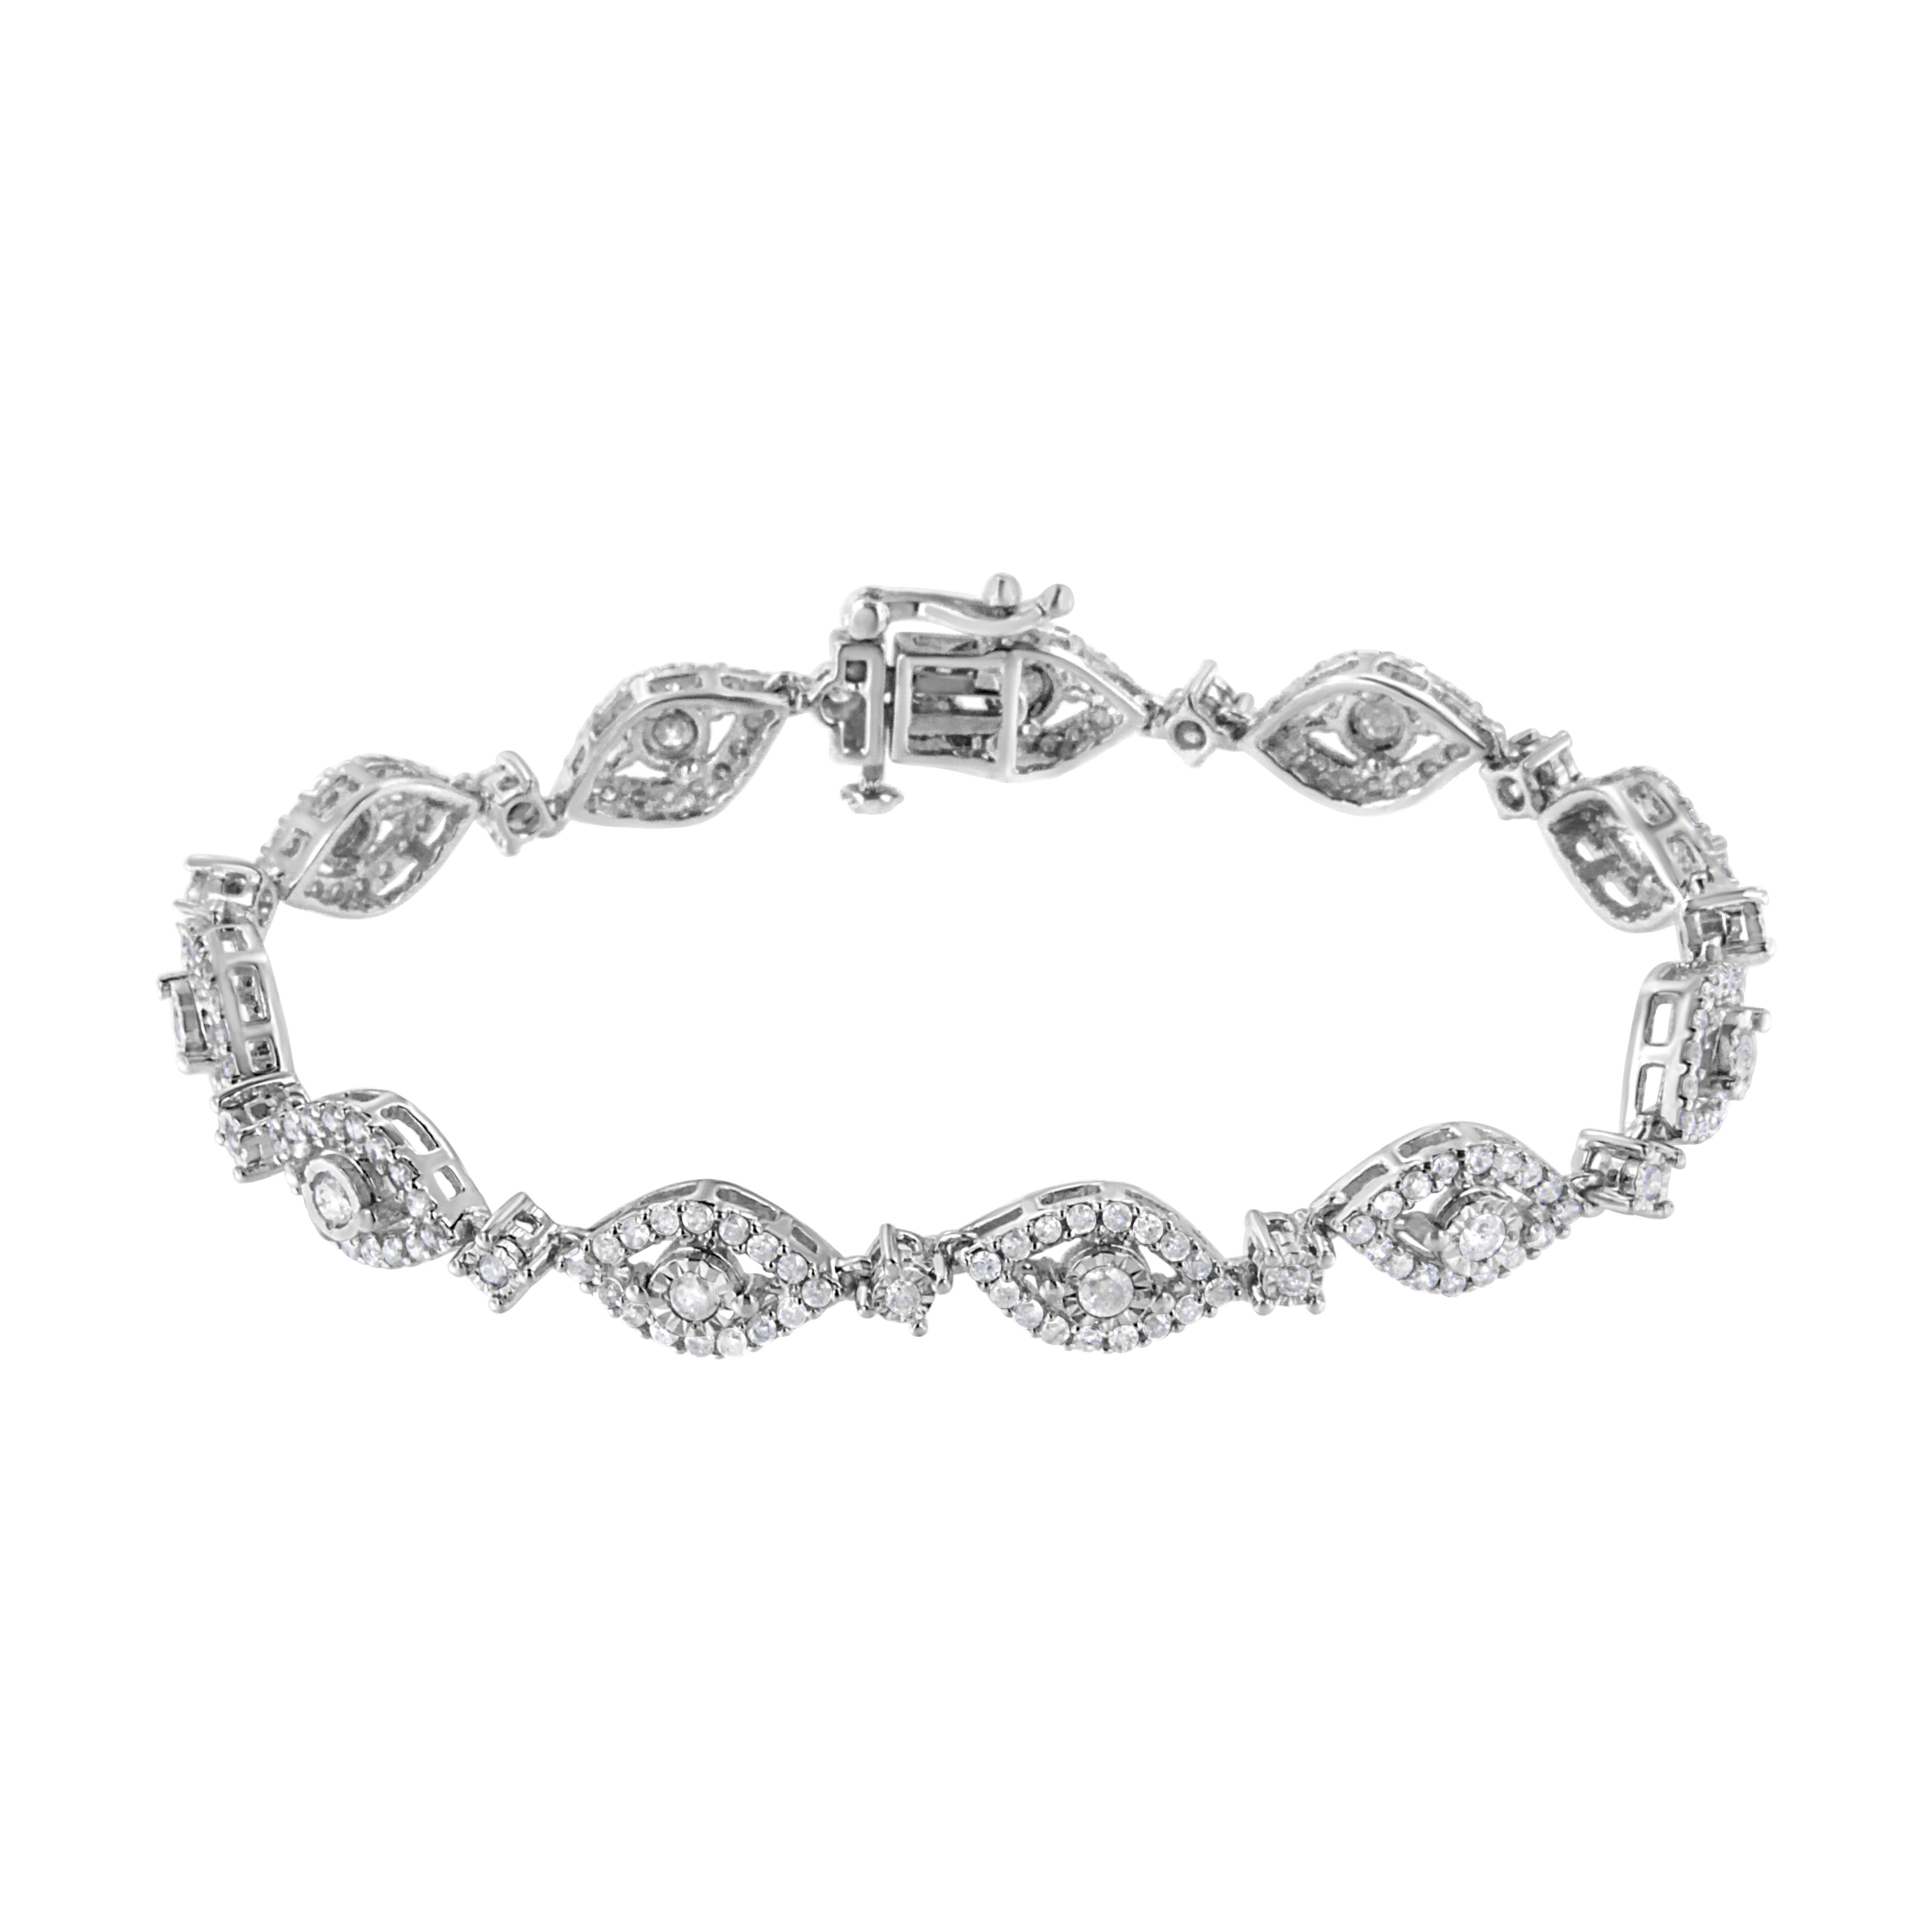 Let yourself be dazzled by this genuine .925 sterling silver link bracelet that showcases 2 1/2ct TDW of diamonds. 198 round cut diamonds glisten in this stunning design. A miracle set round cut diamond sits at the heart of each diamond inlaid